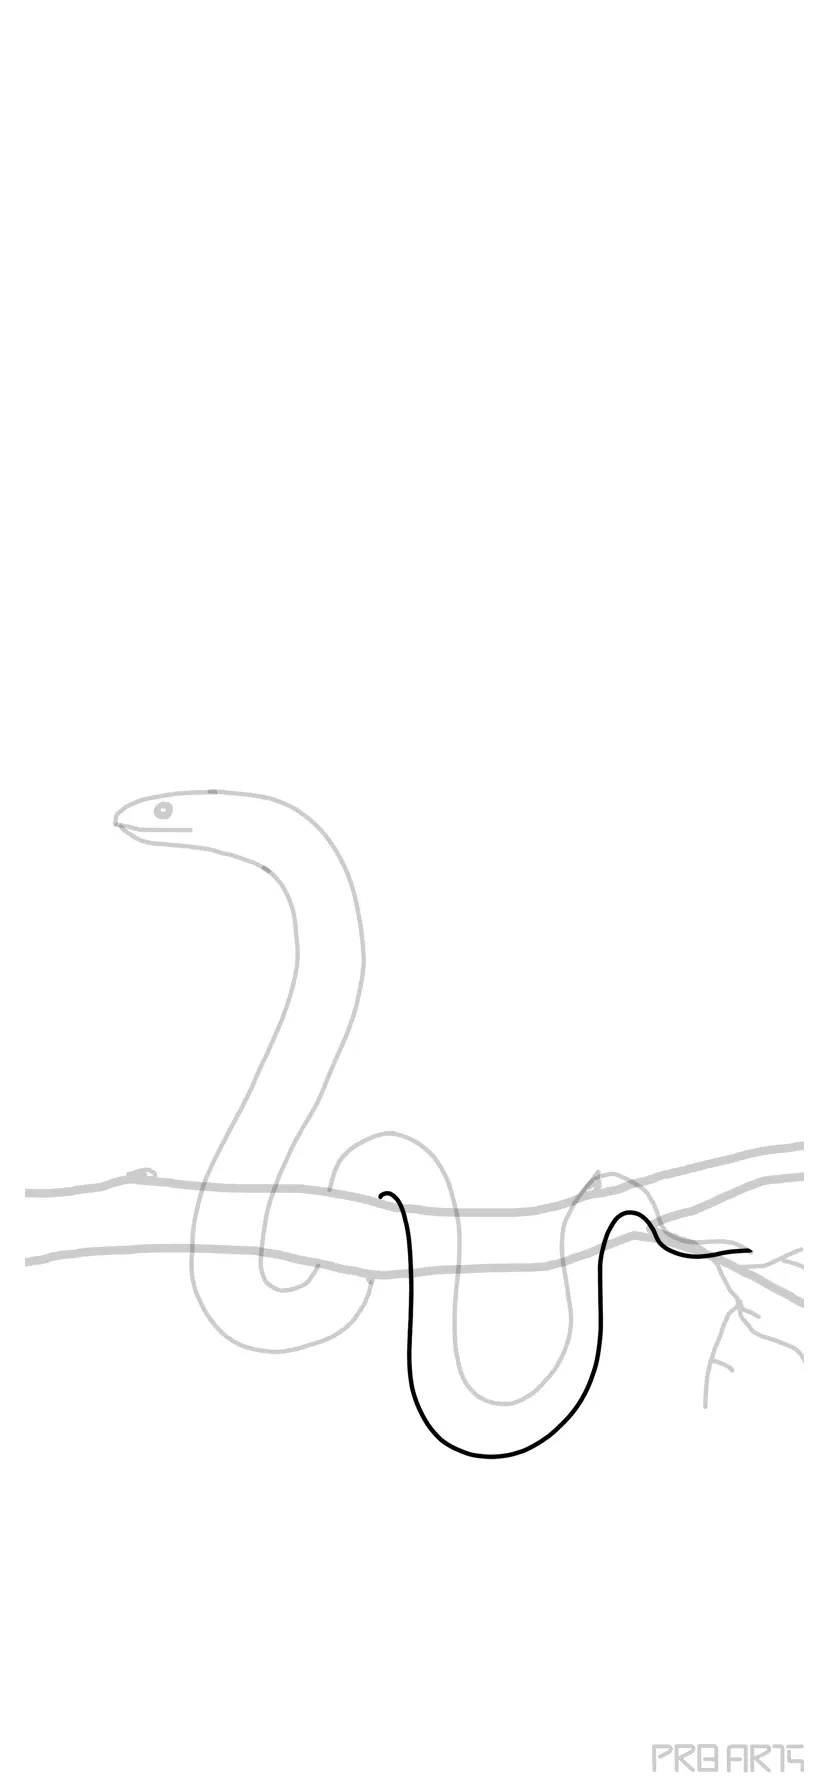 How to draw a rattlesnake Stepbystep drawing tutorial